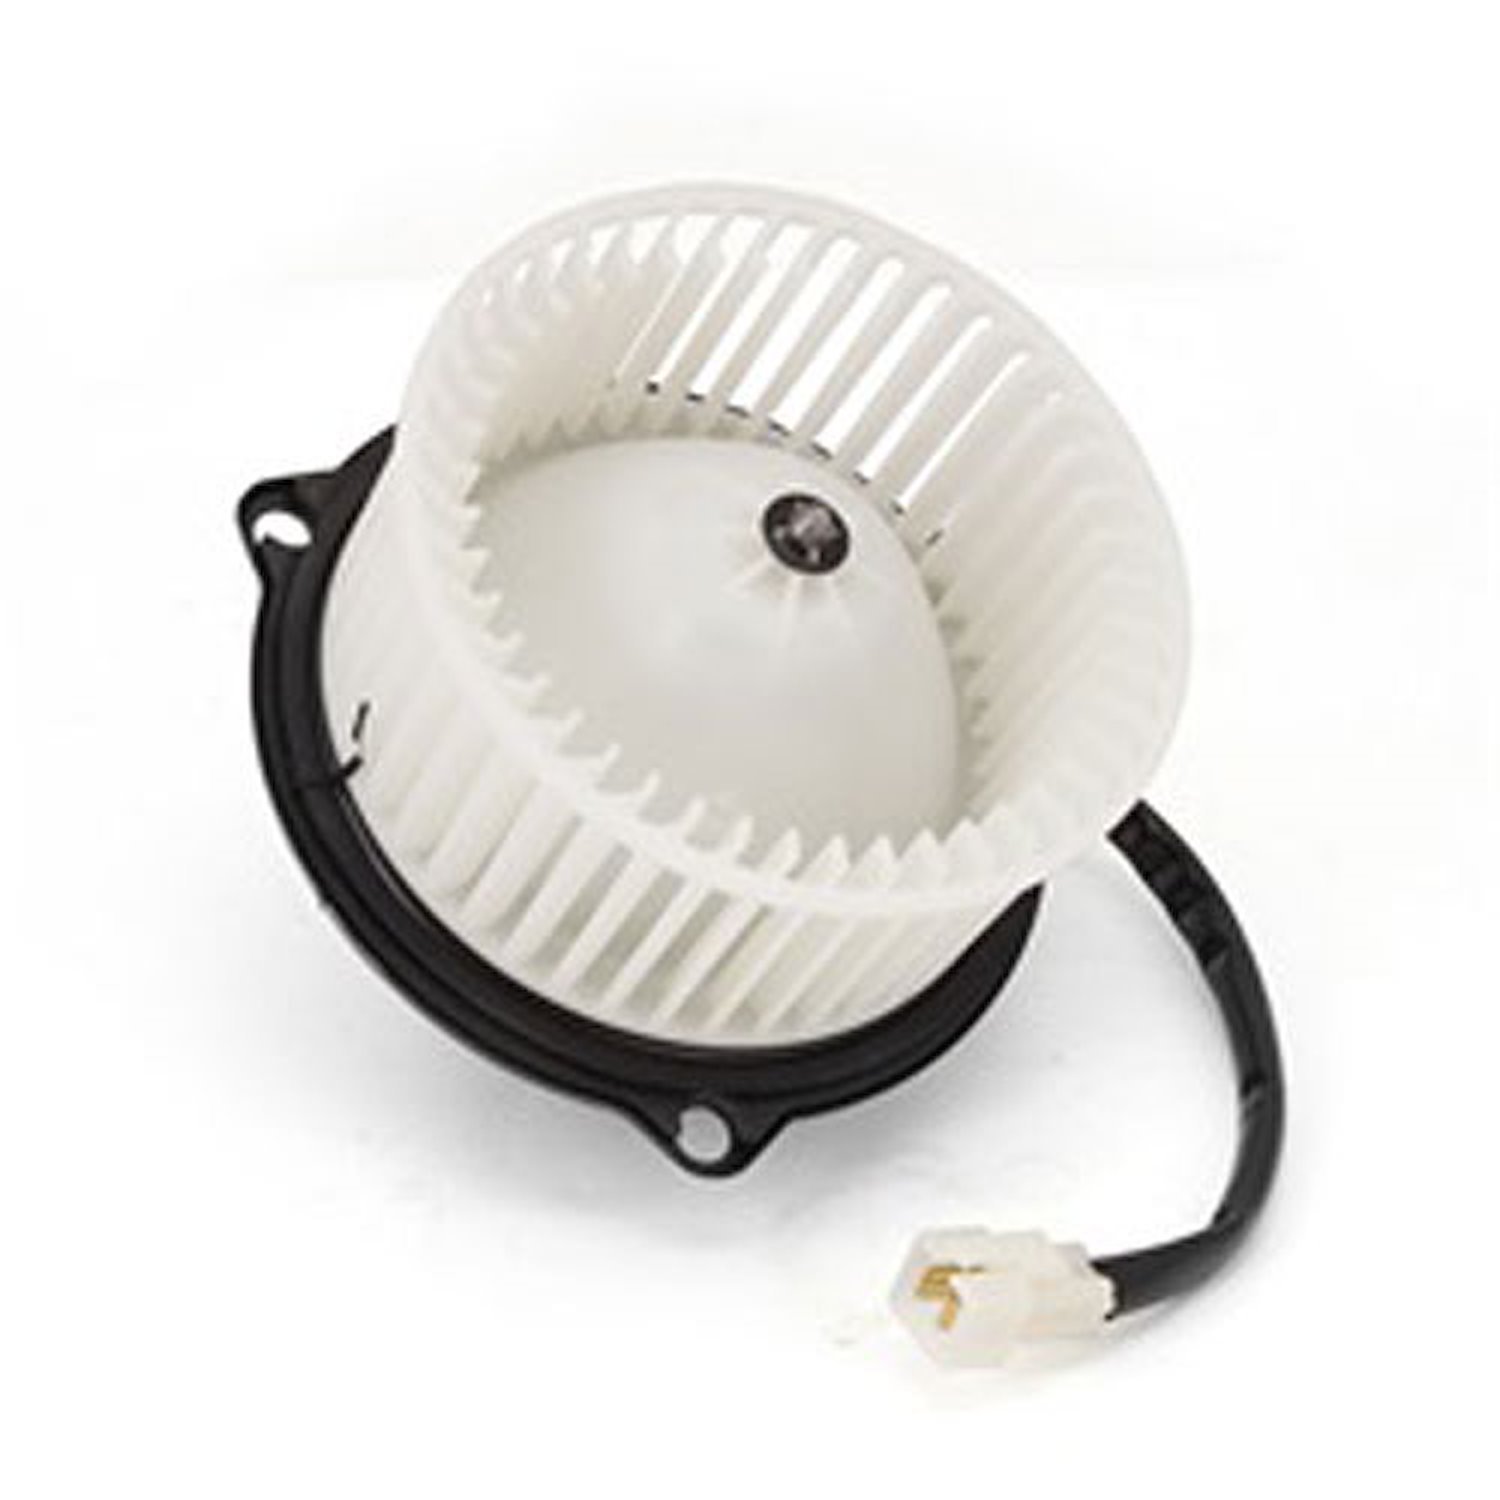 This blower assembly from Omix-ADA fits 93-98 Jeep Grand Cherokees.